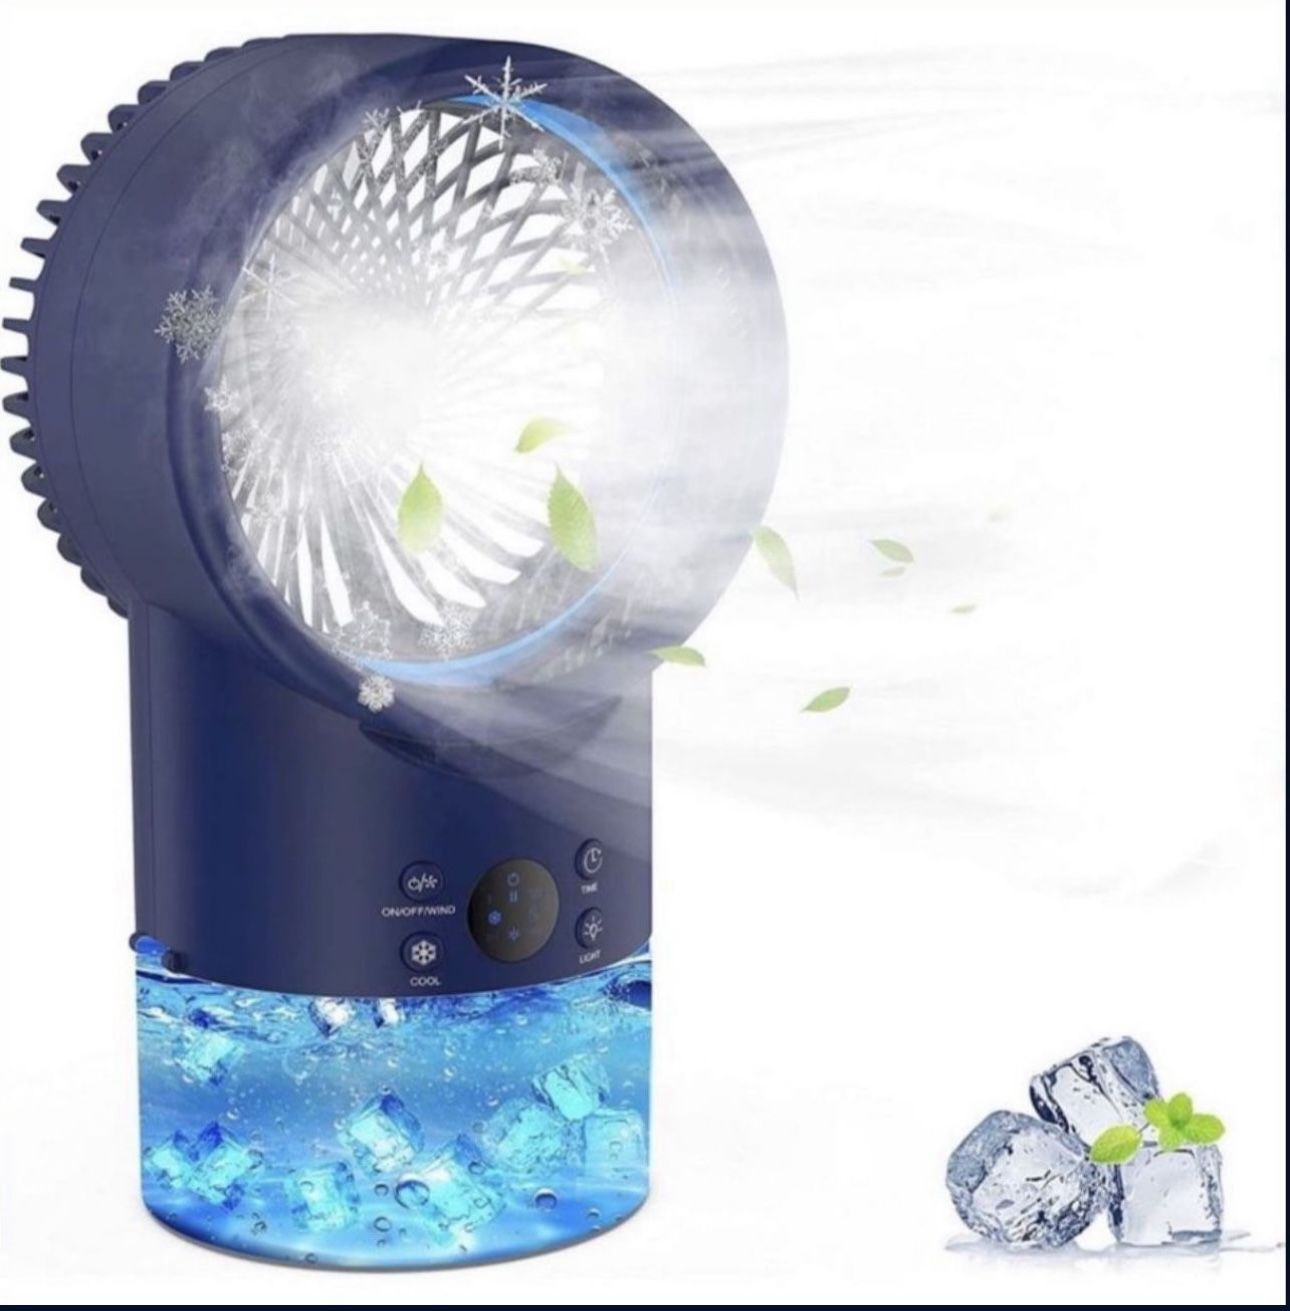 EEIEER Air Conditioner Fan Personal Evaporative Cooler Circulator 3 Speeds 2/4H Timer 7 Colors LED Light 2 Misting Modes Humidifier Quiet Mist Cooling